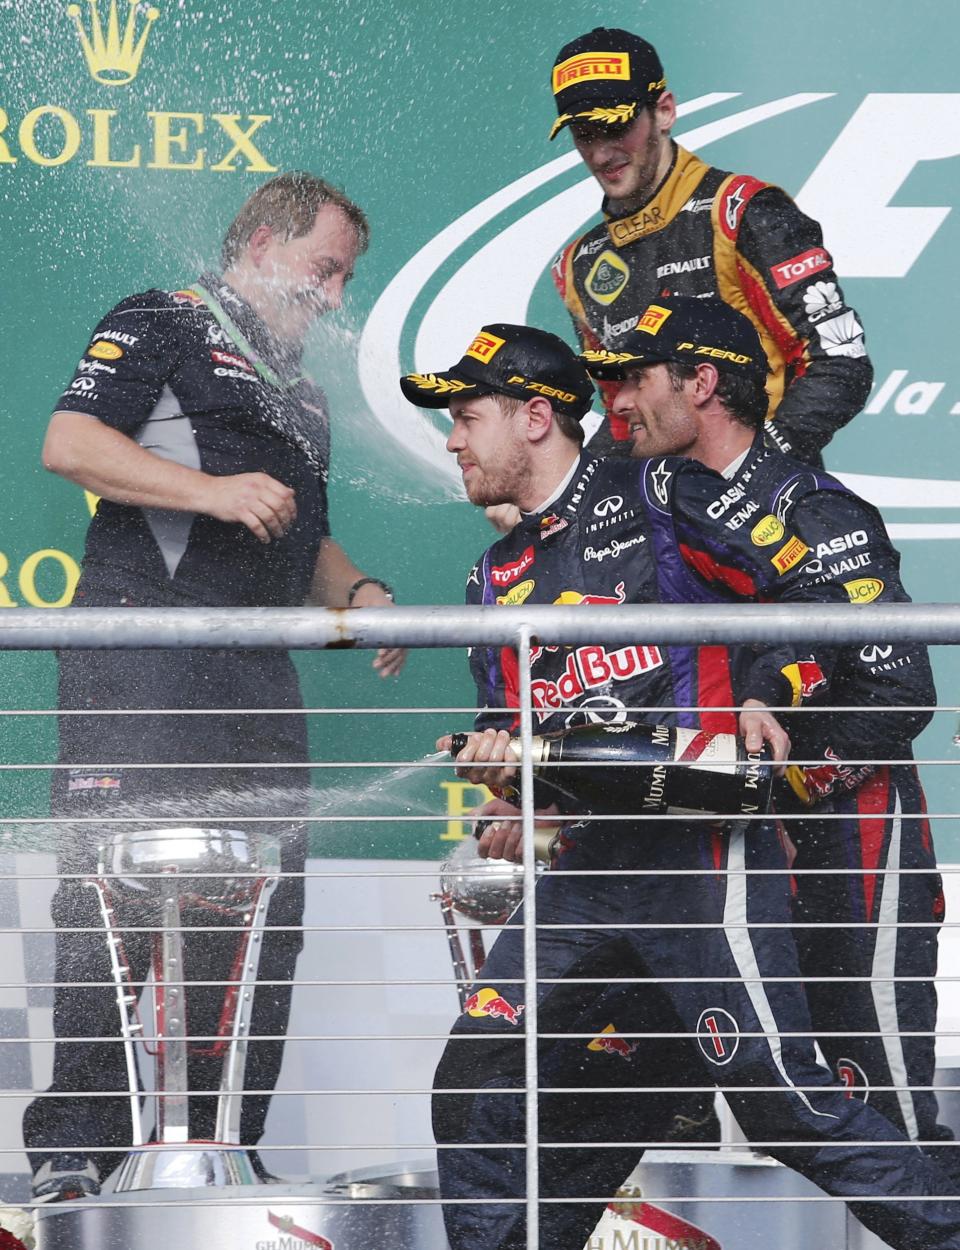 Red Bull Formula One driver Sebastian Vettel (front) of Germany, teammate Mark Webber of Australia (R) and Lotus Formula One driver Romain Grosjean of France (top R) spray champagne next to Red Bull Racing's Head of IT Matt Cadieux during celebrations on the podium after the Austin F1 Grand Prix at the Circuit of the Americas in Austin November 17, 2013.